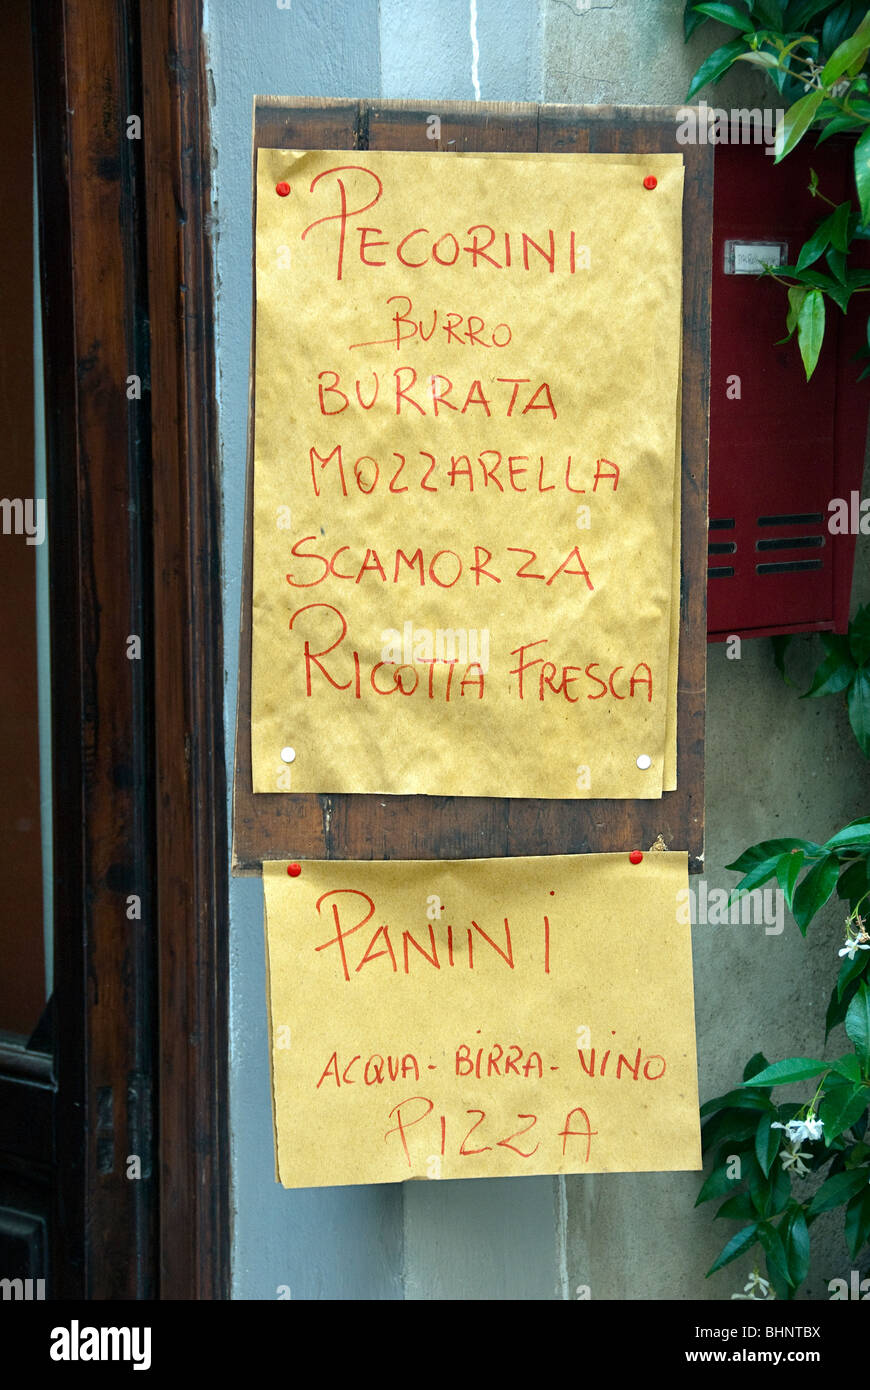 Hand drawn menu typical of a rural Tuscan restaurant Stock Photo